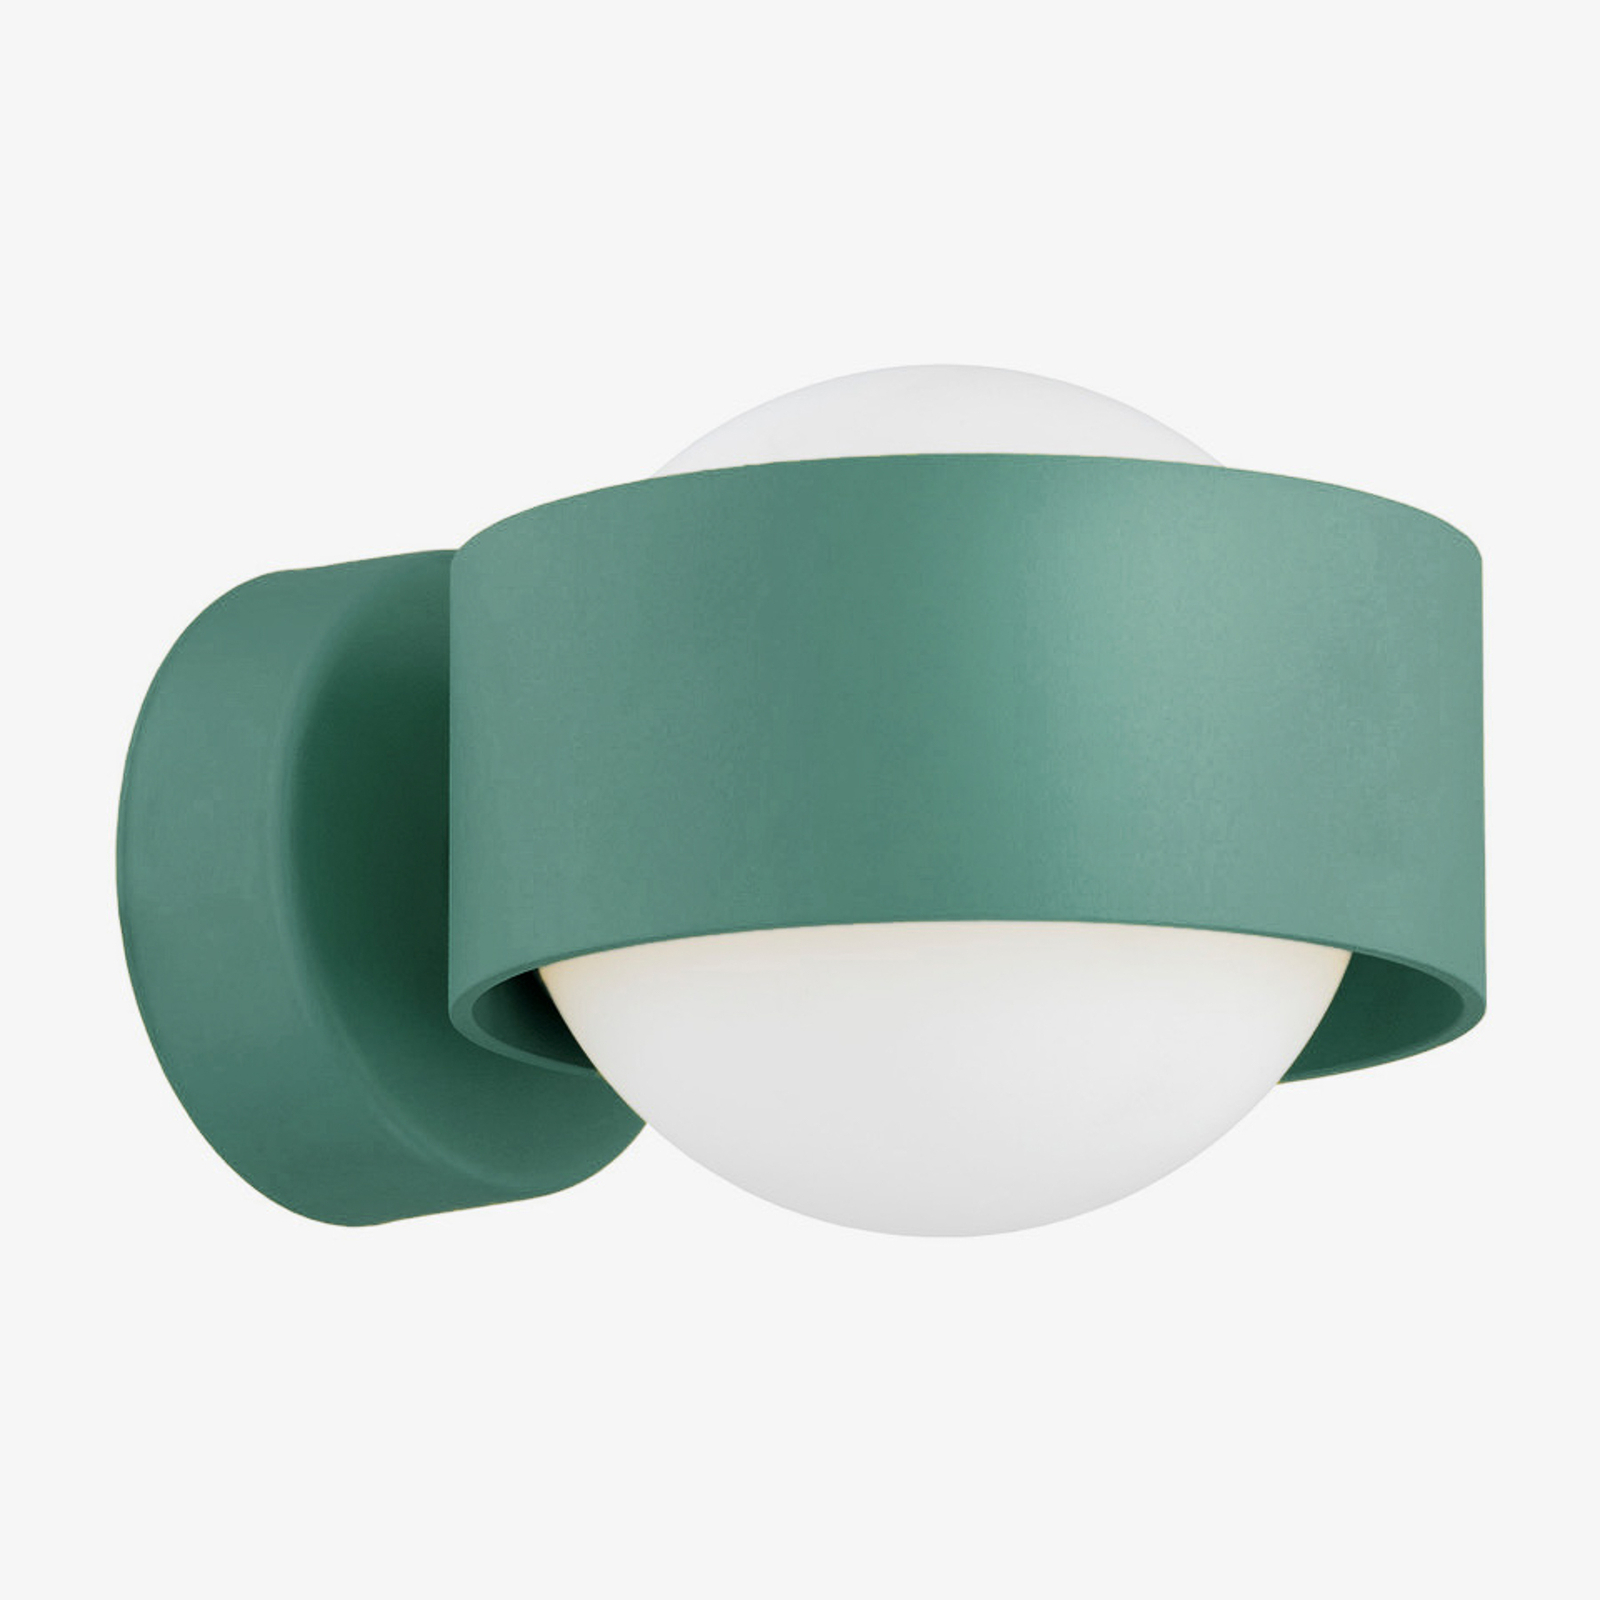 Mado wall light made of glass and steel, green